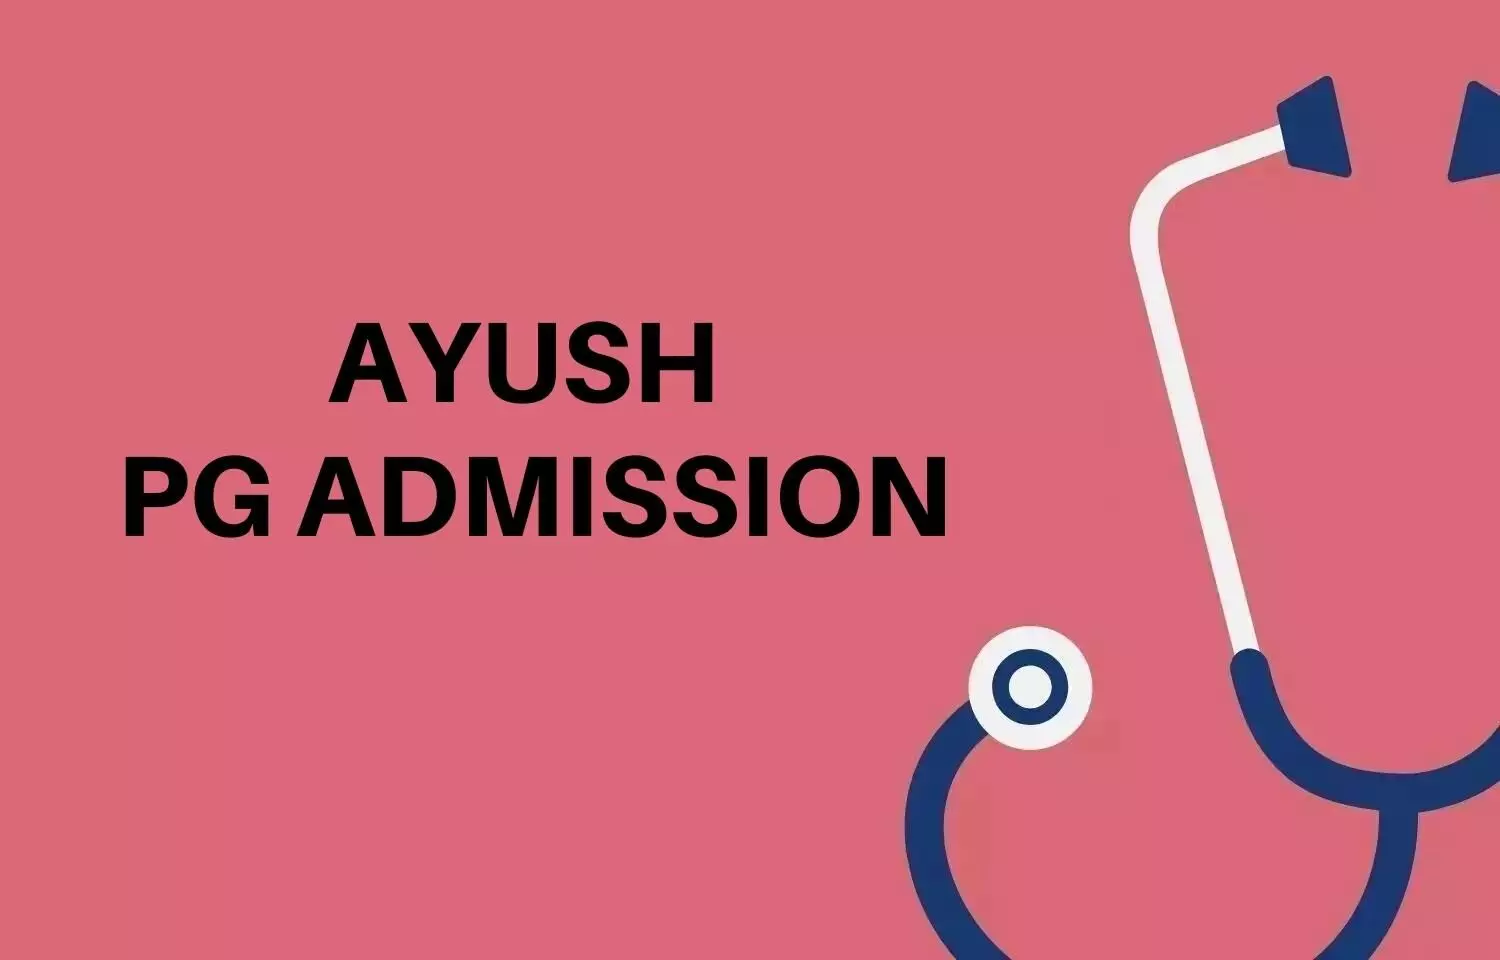 PG Ayurveda, Homeopathy Admissions 2021: Gujarat DME issues notice for Round 3 candidates, check out schedule, Details